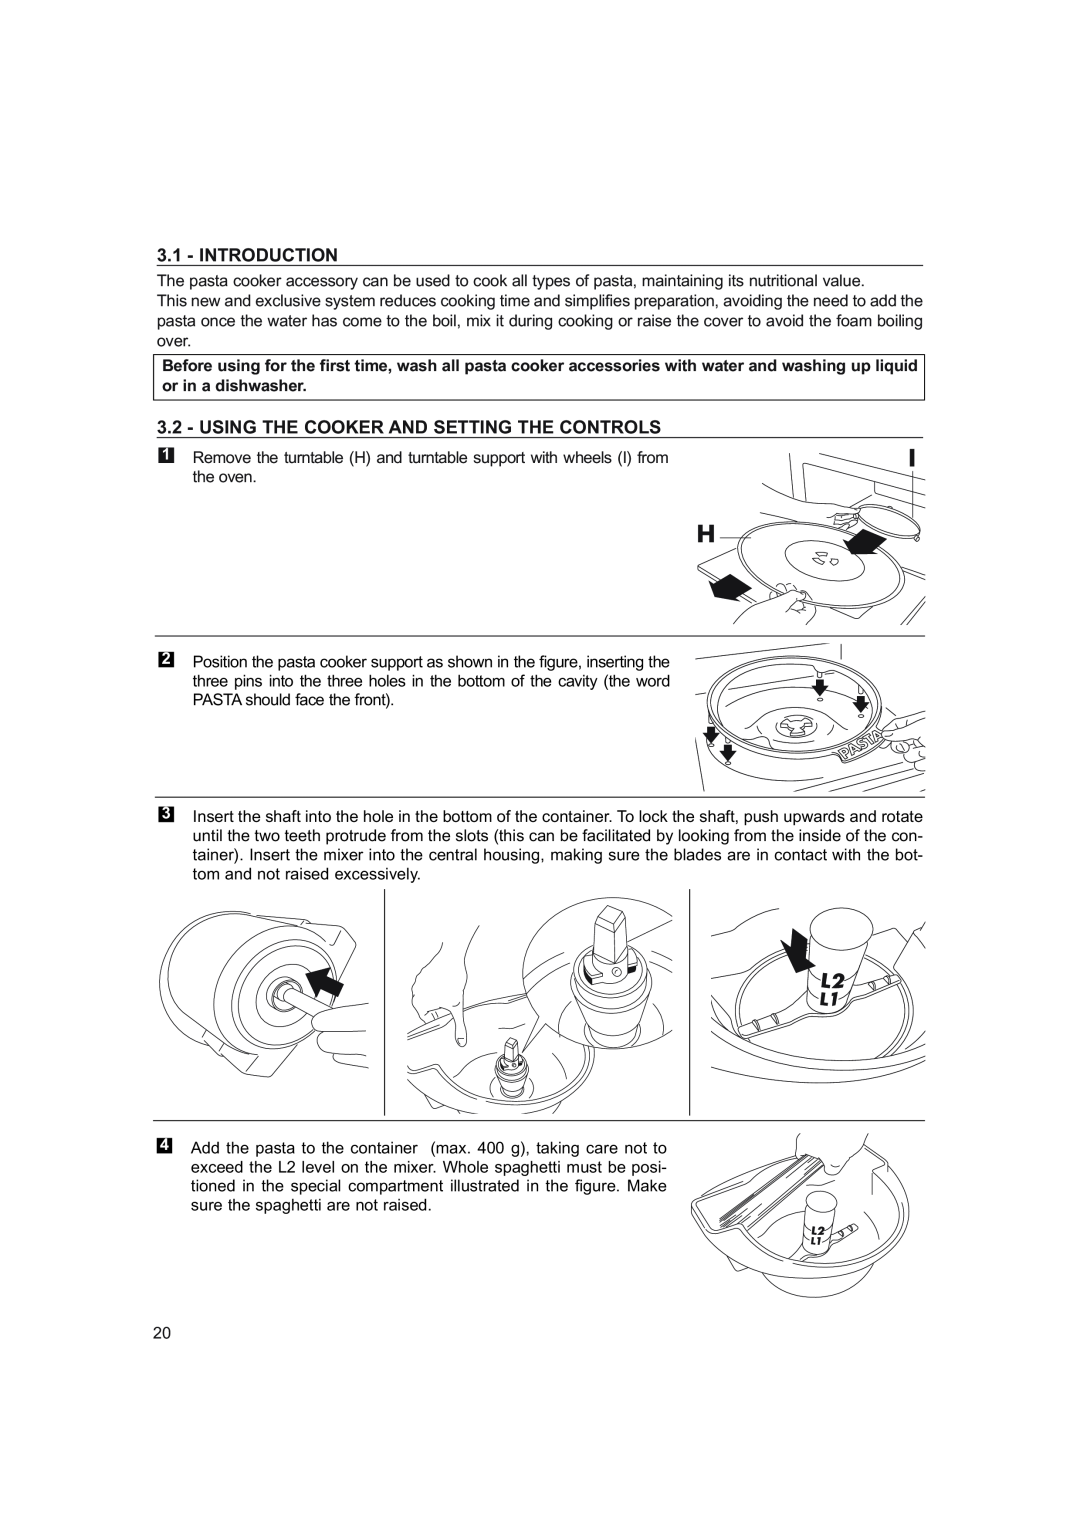 Hotpoint 6685X manual Introduction, Using The Cooker And Setting The Controls 